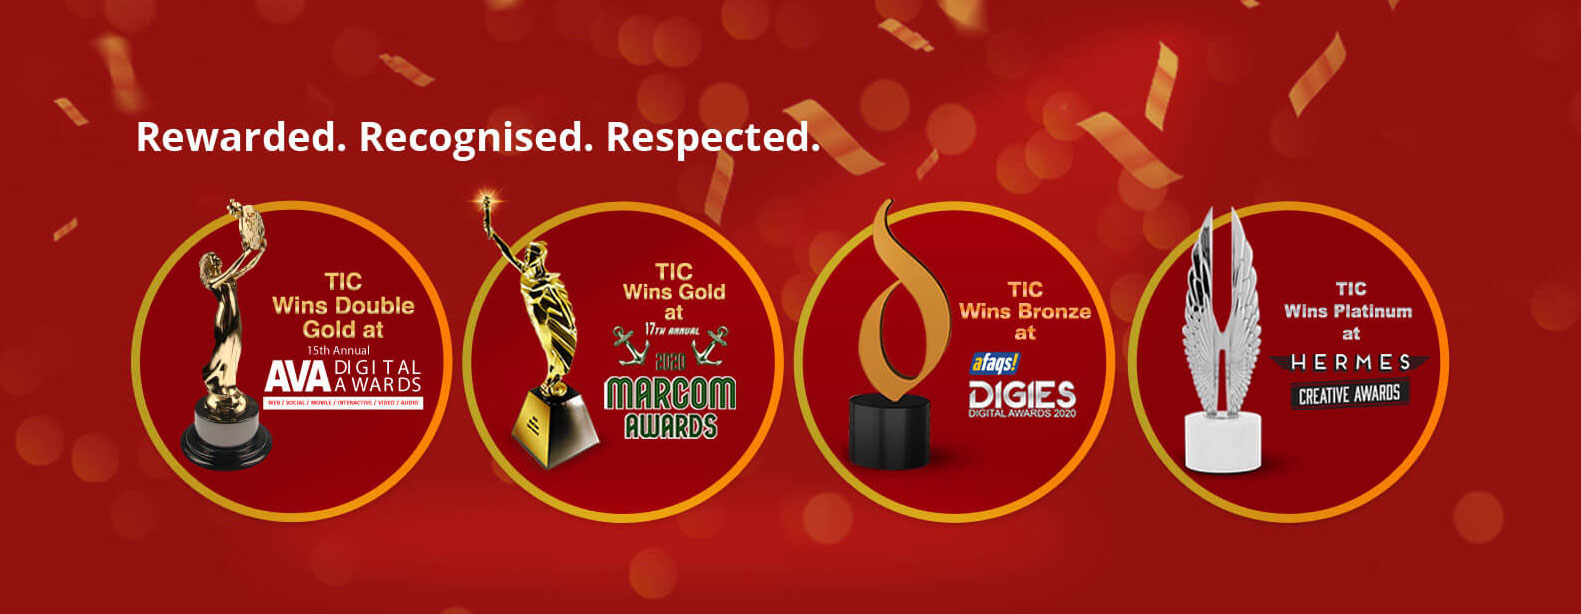 Awards won by TIC